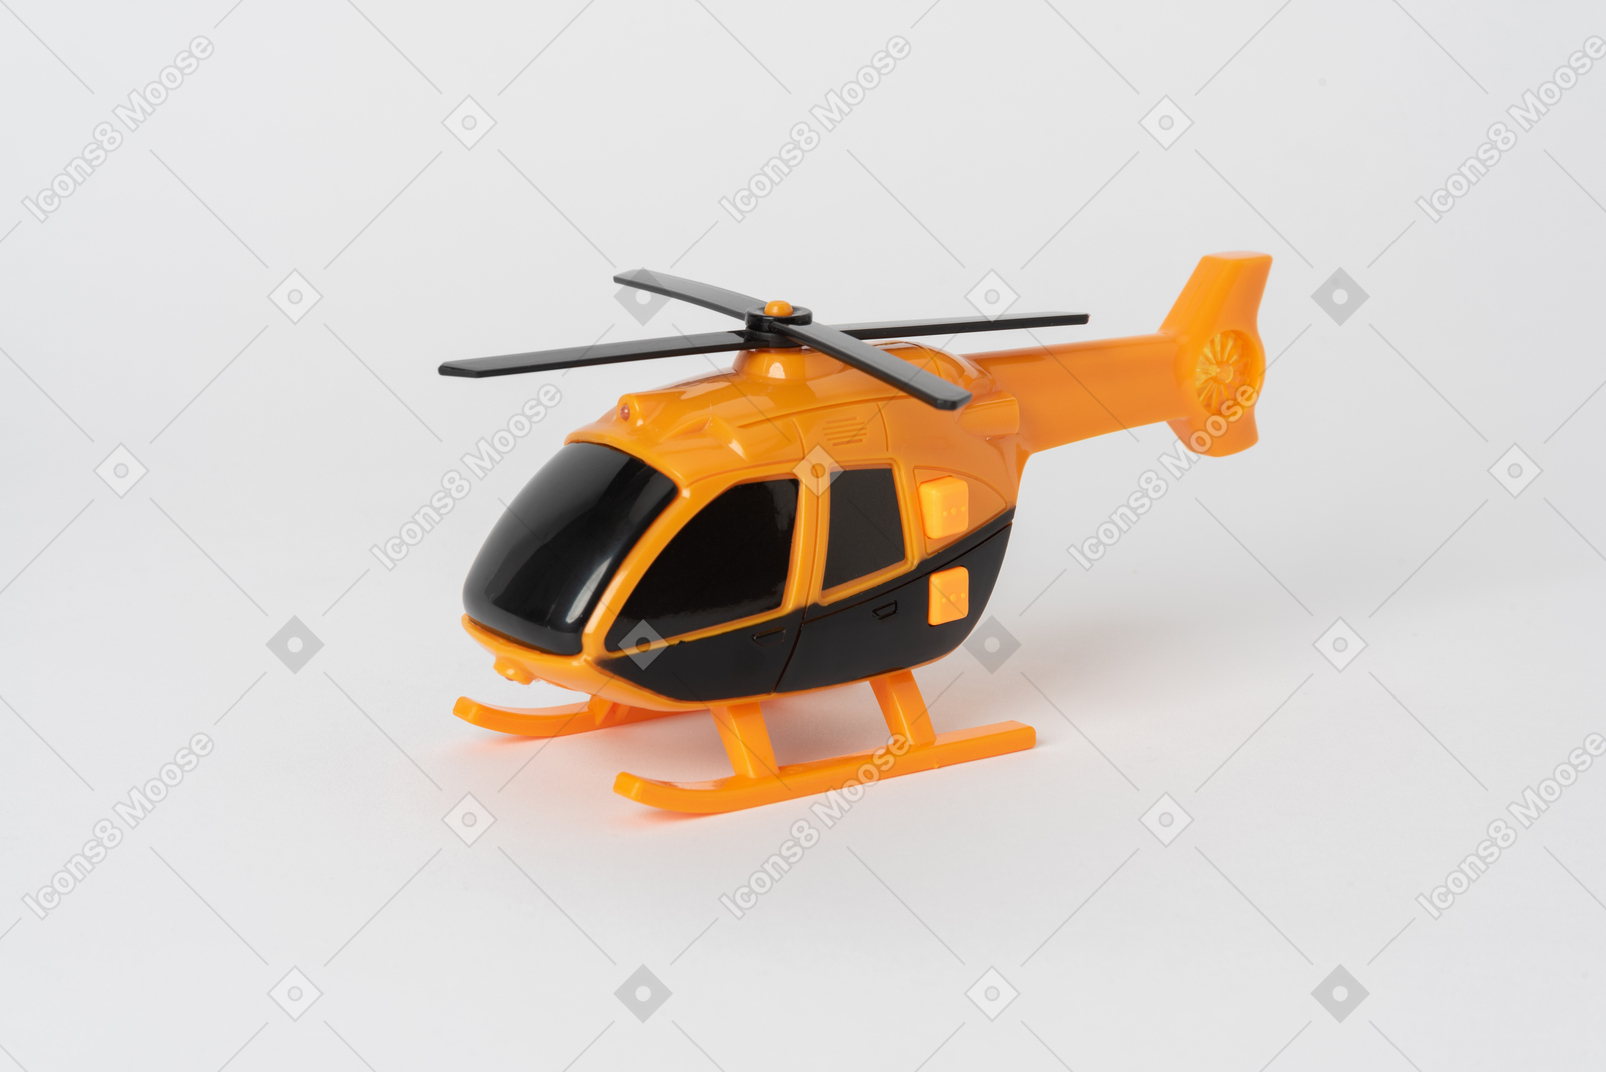 Black and orange toy helicopter standing against a plain white background